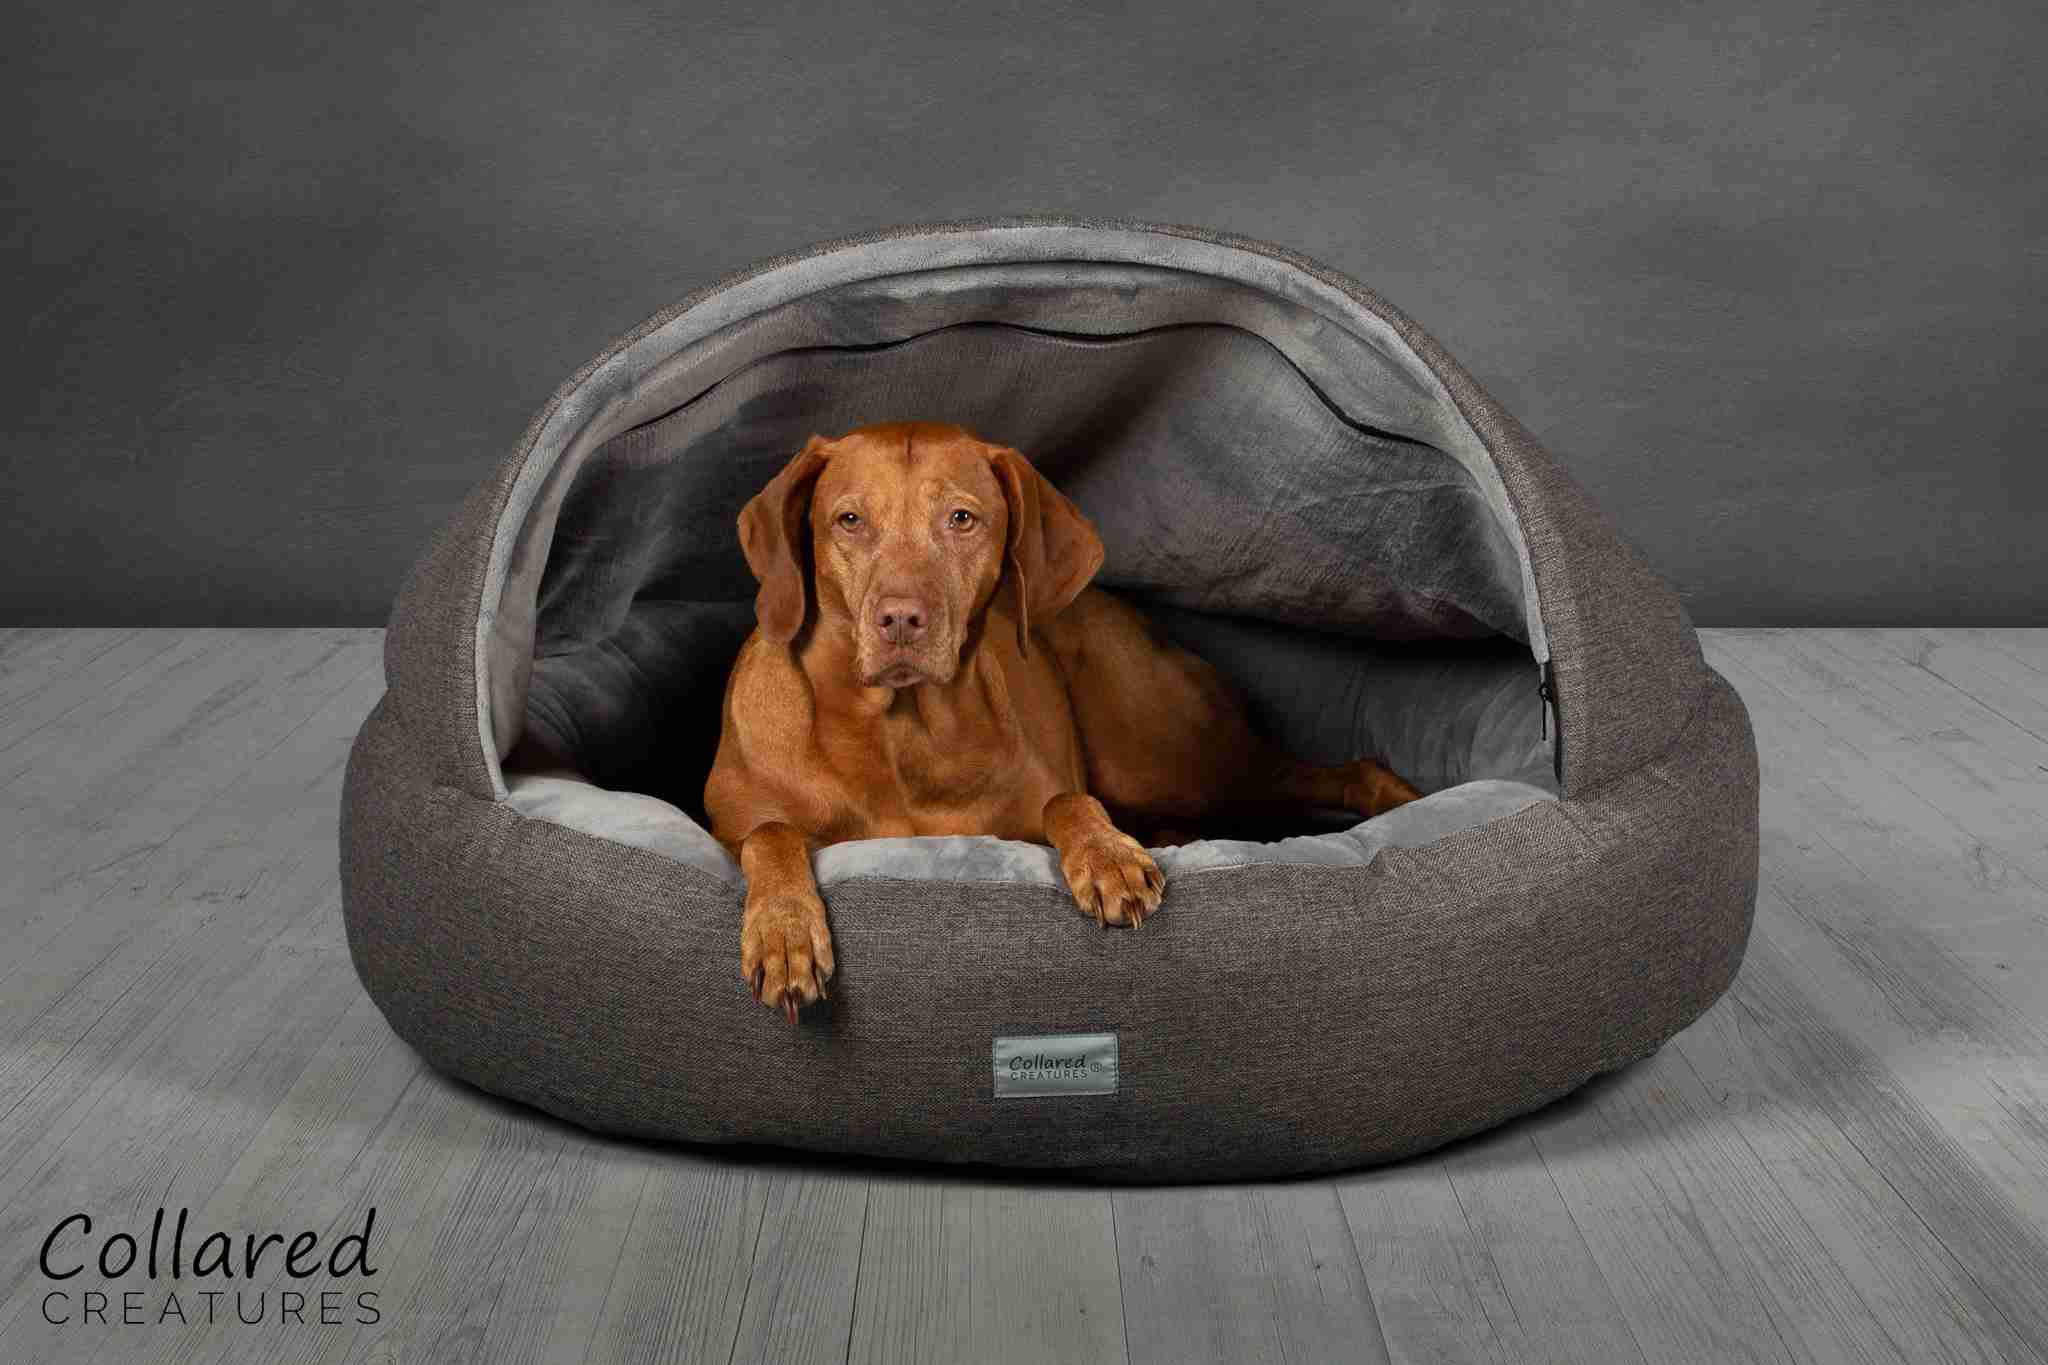 Collared Creatures Grey Deluxe Comfort Cocoon Dog Cave Bed